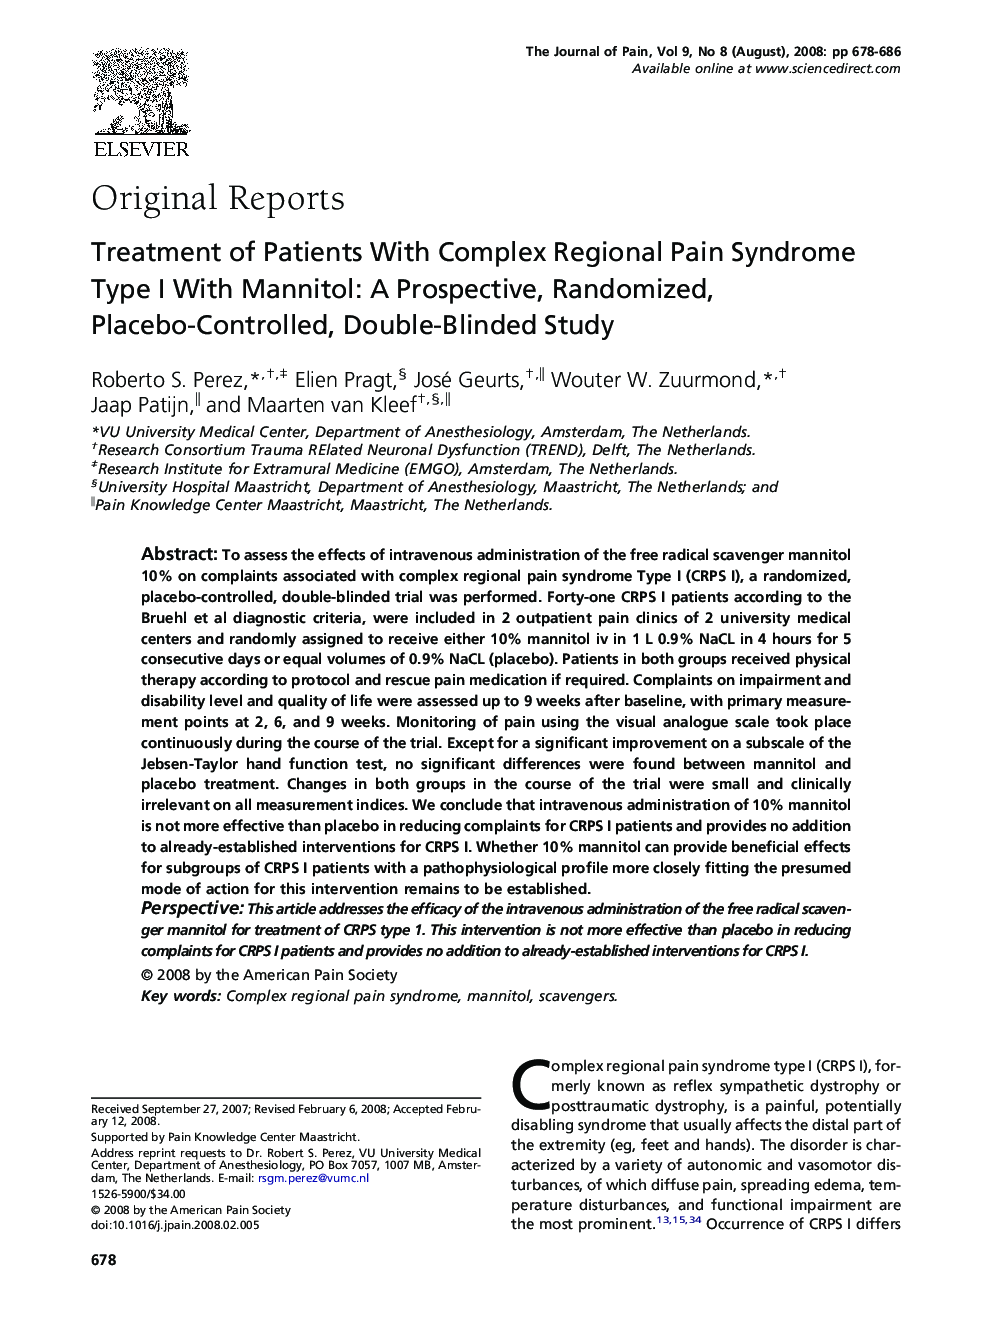 Treatment of Patients With Complex Regional Pain Syndrome Type I With Mannitol: A Prospective, Randomized, Placebo-Controlled, Double-Blinded Study 